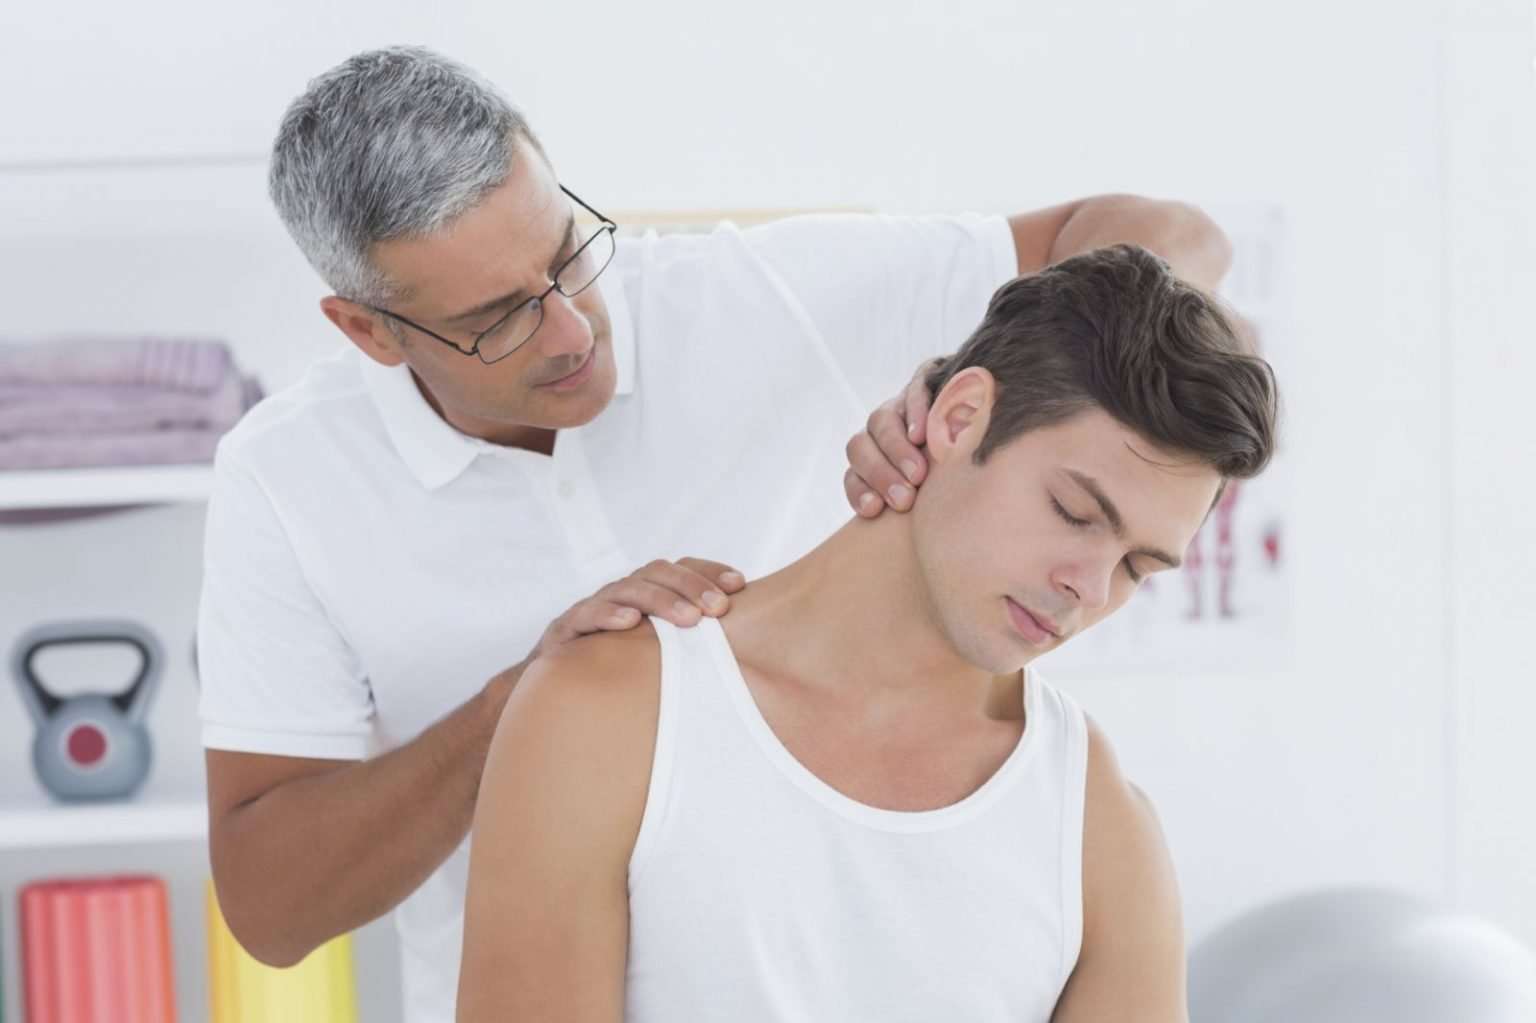 Can You Use Massage Gun On Neck?